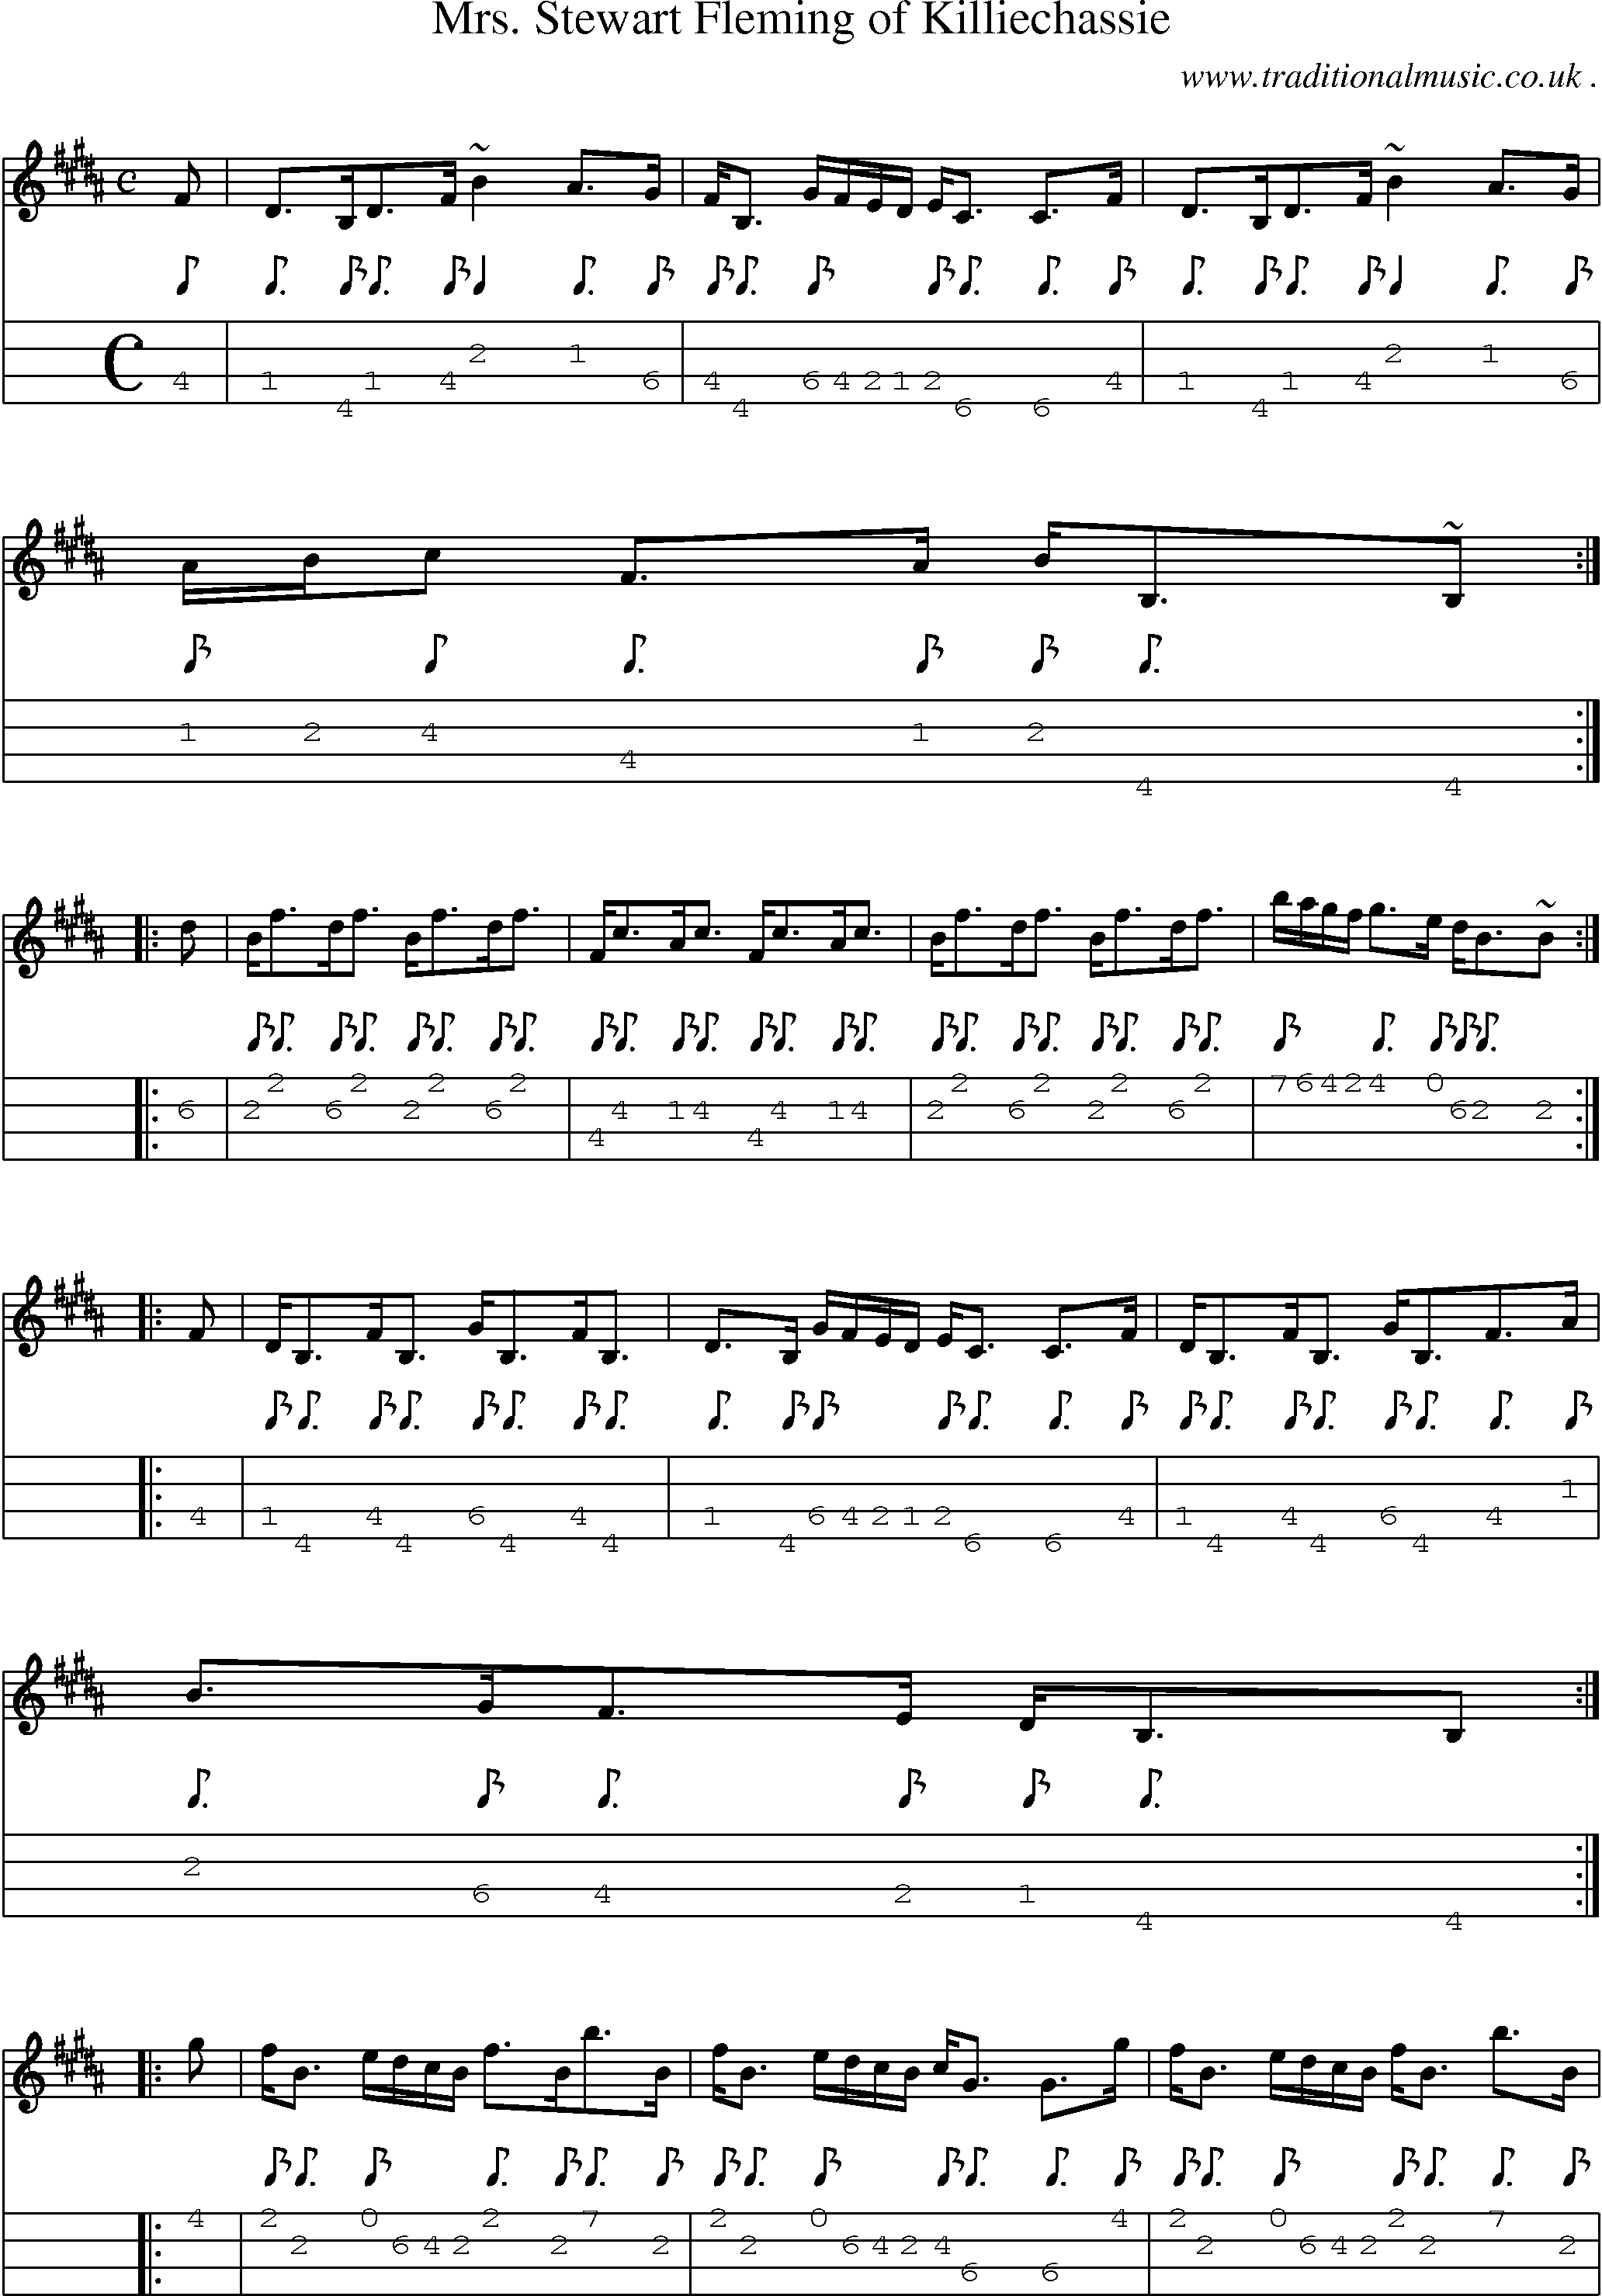 Sheet-music  score, Chords and Mandolin Tabs for Mrs Stewart Fleming Of Killiechassie